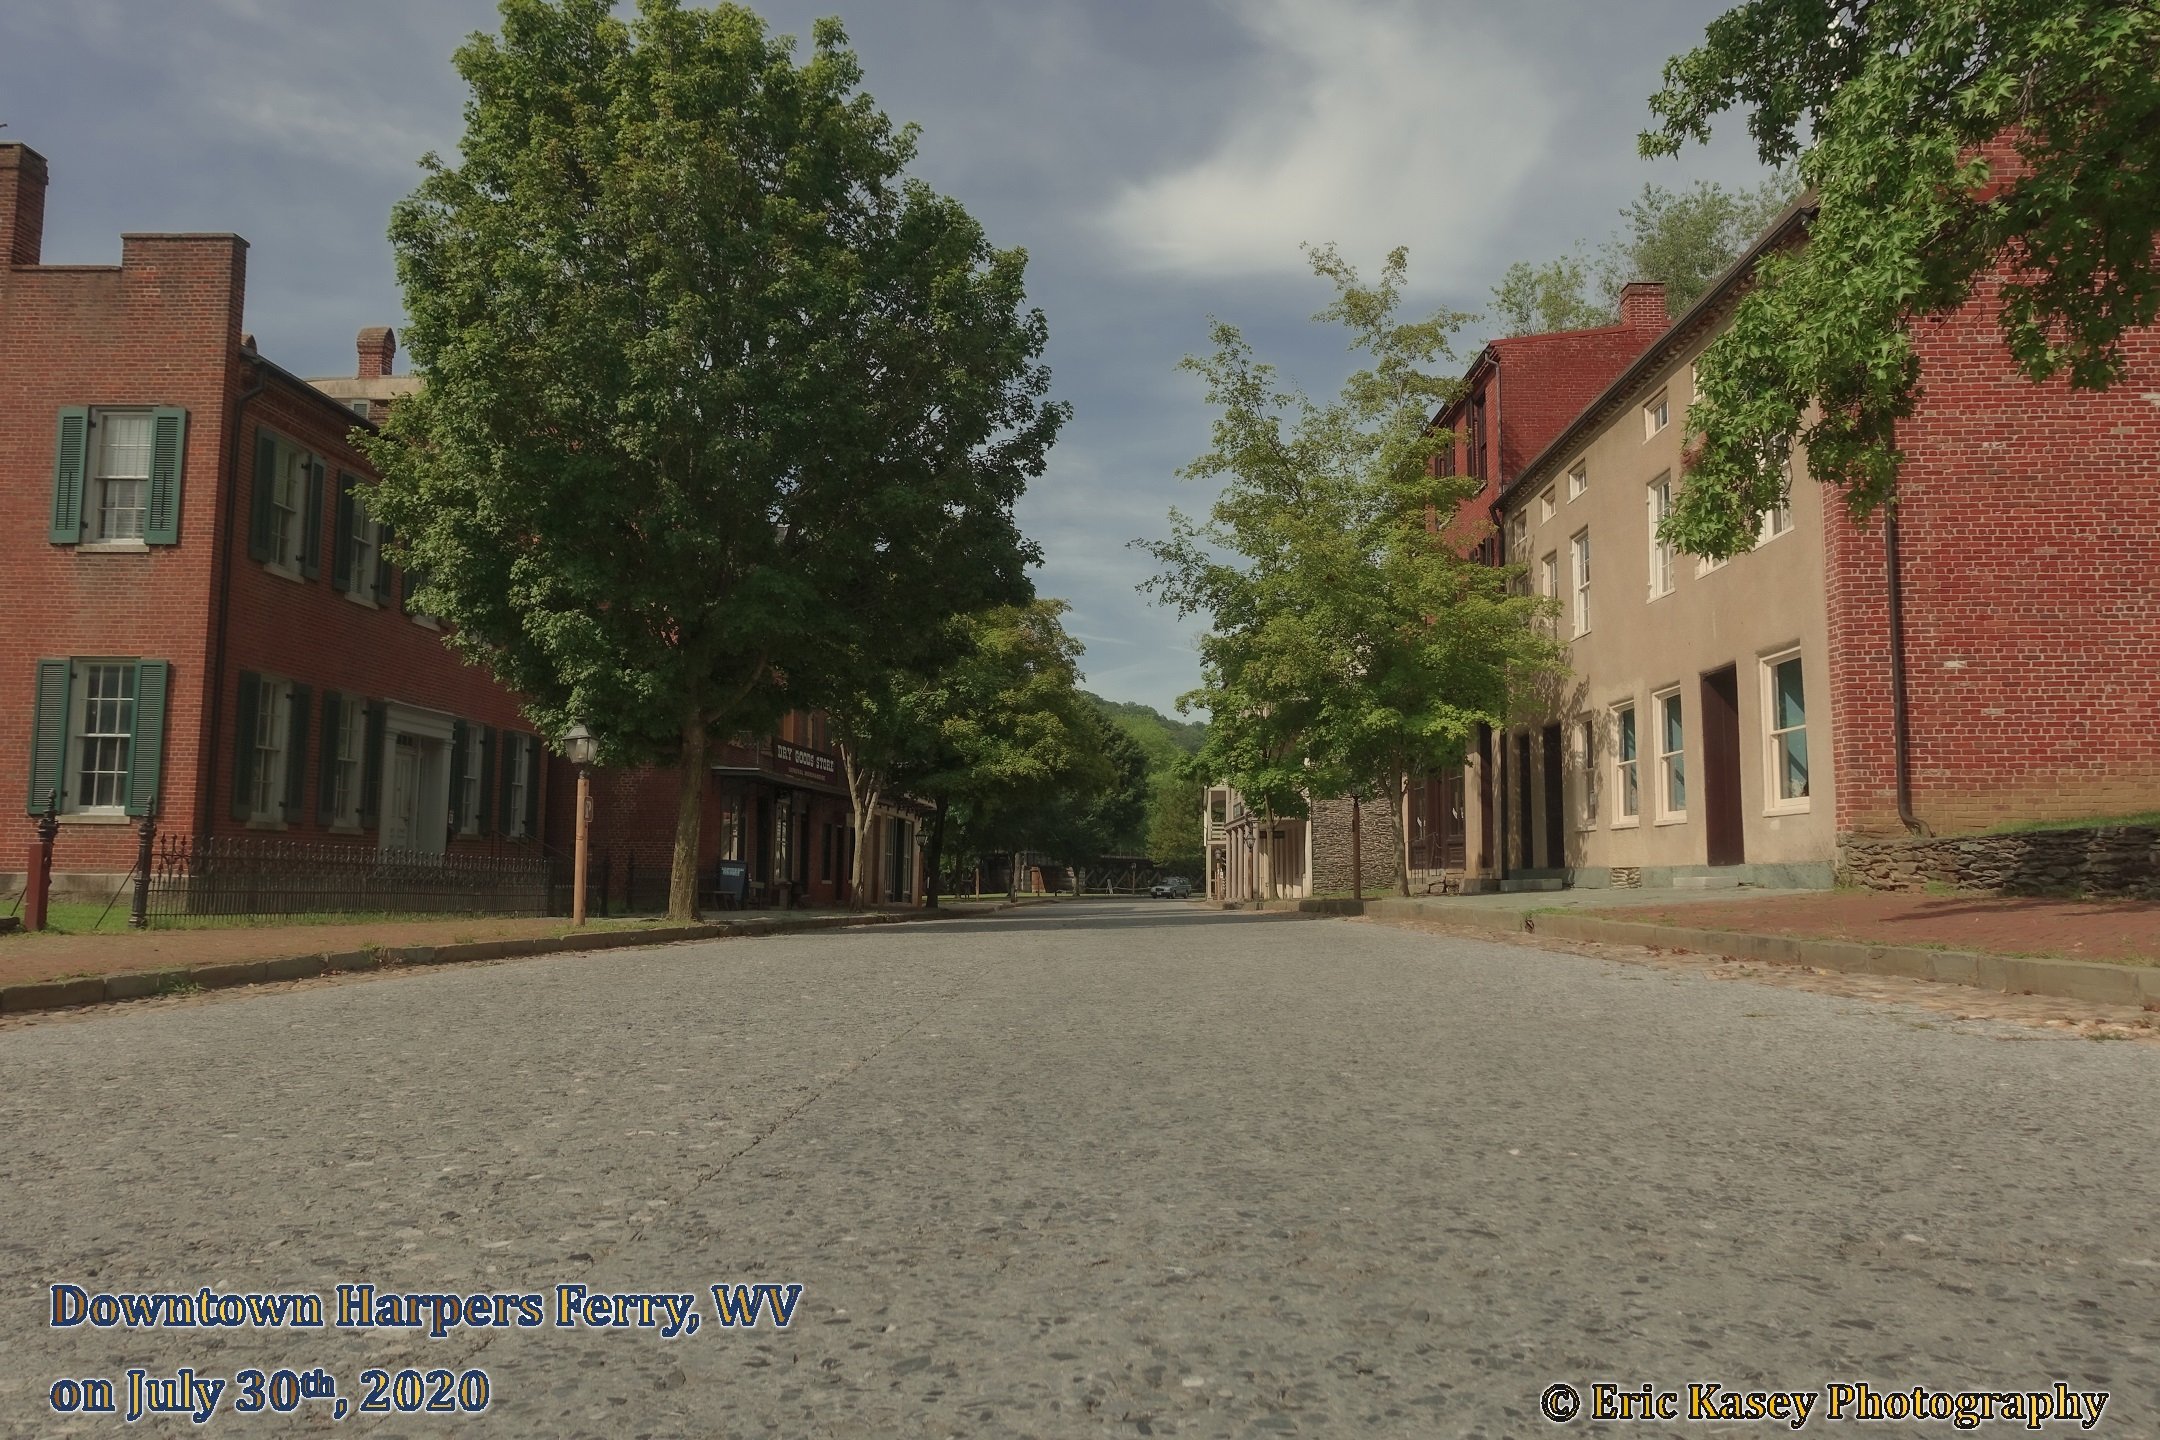 49 - Downtown Harpers Ferry, WV on July 30th, 2020.JPG